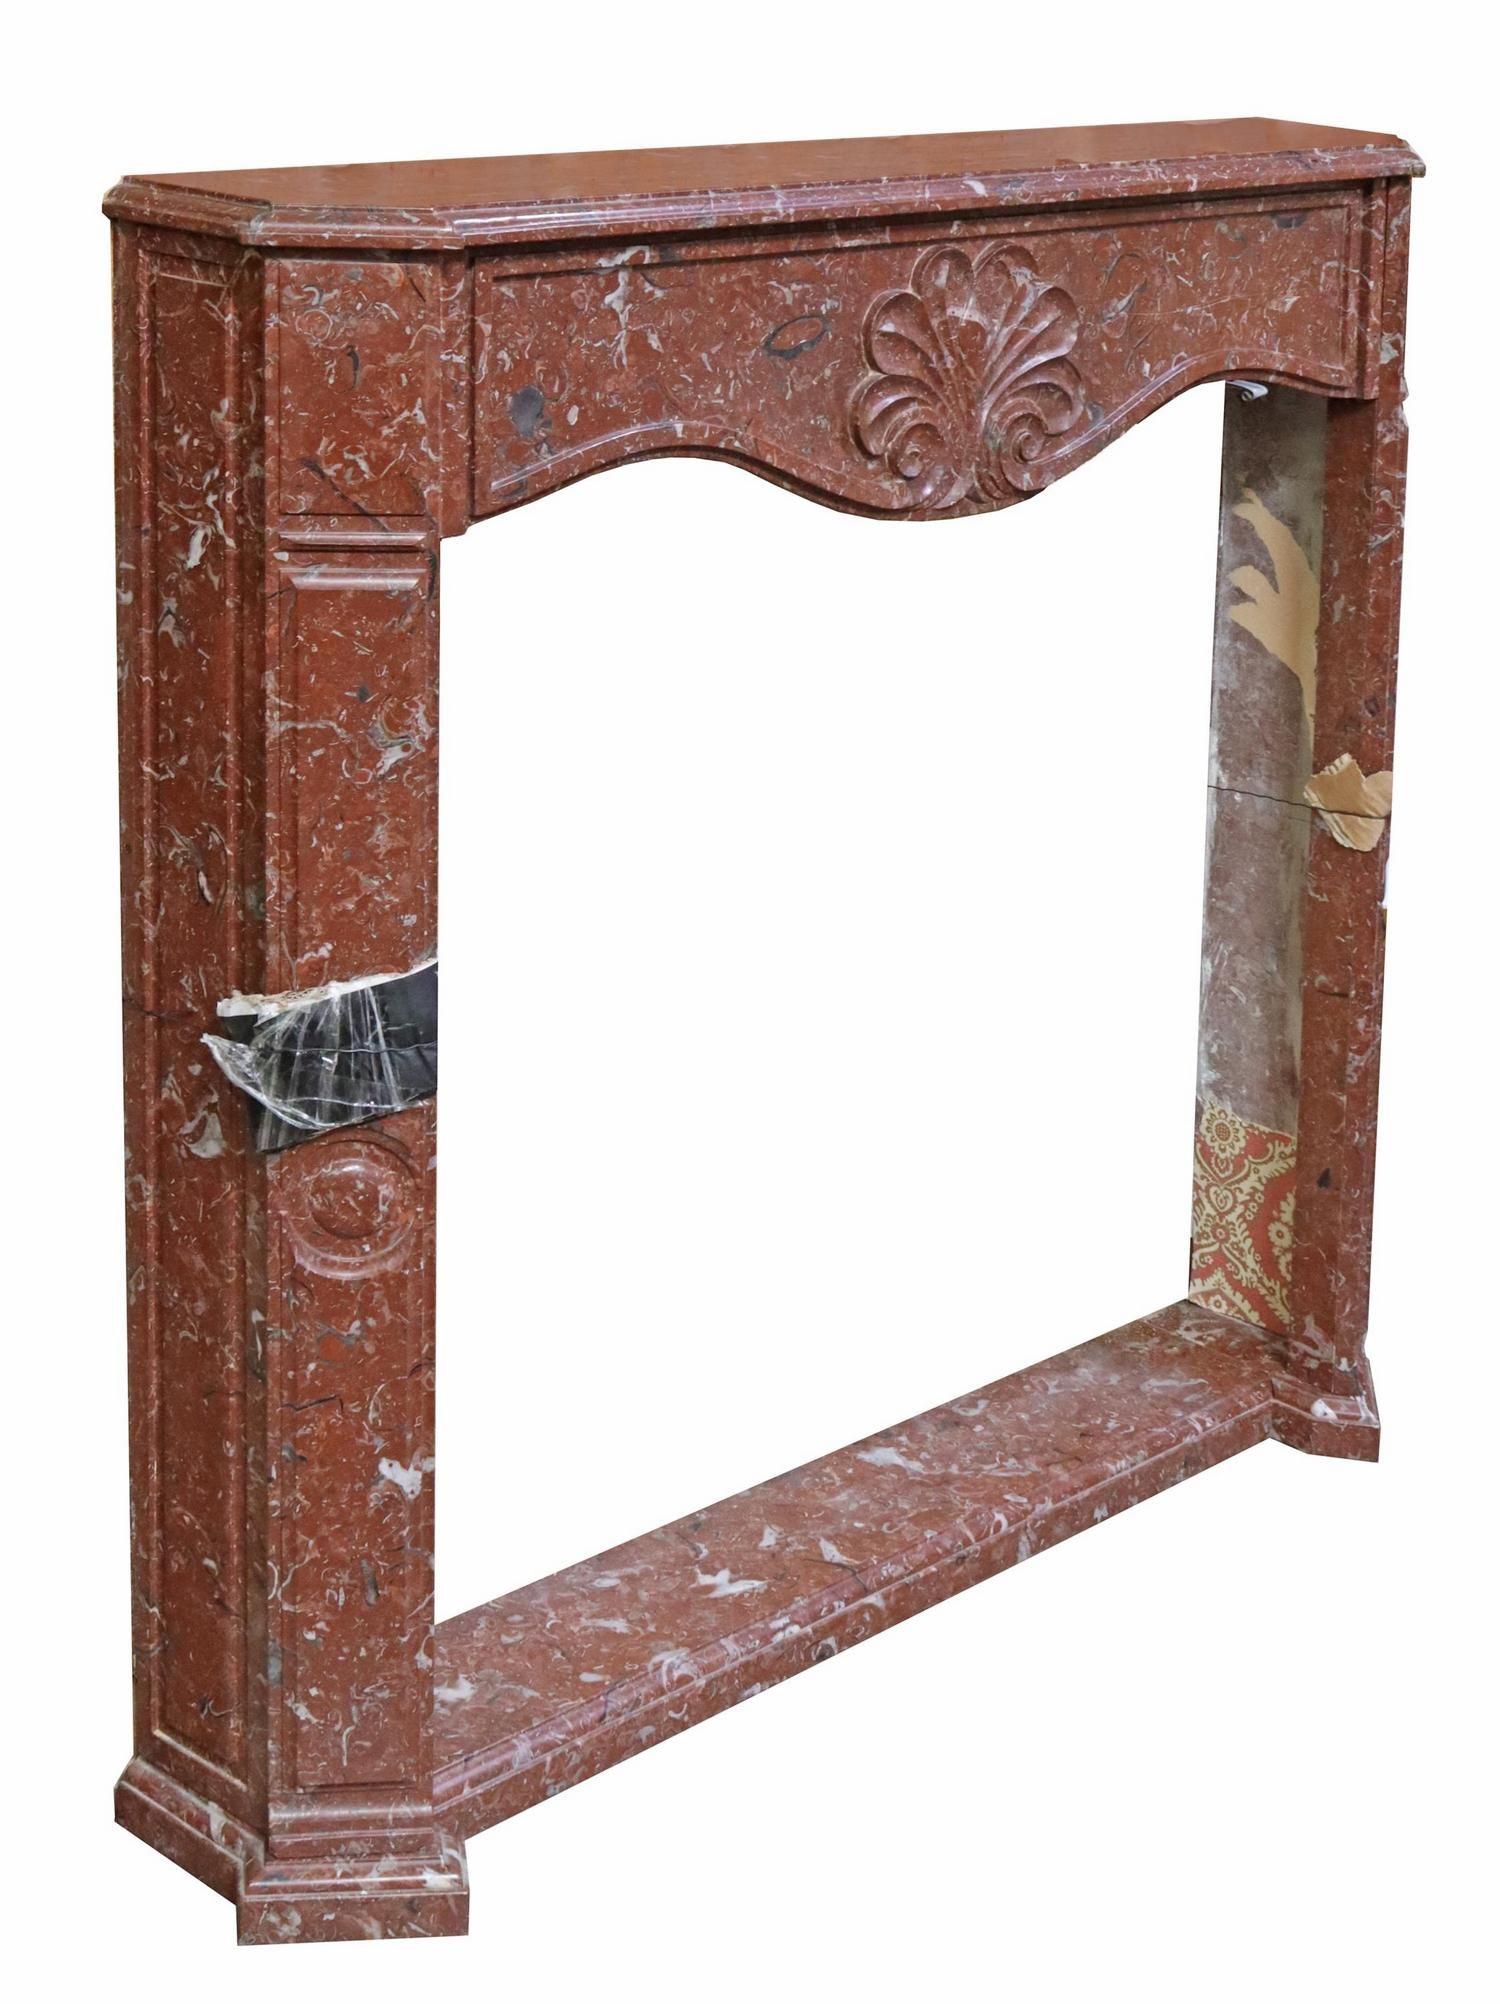 Continental red marble fireplace surround, early 20th c., having molded mantel shelf, over shell carved apron, pilaster corner supports, rising on plinth base.

Dimensions
 approx 51.5